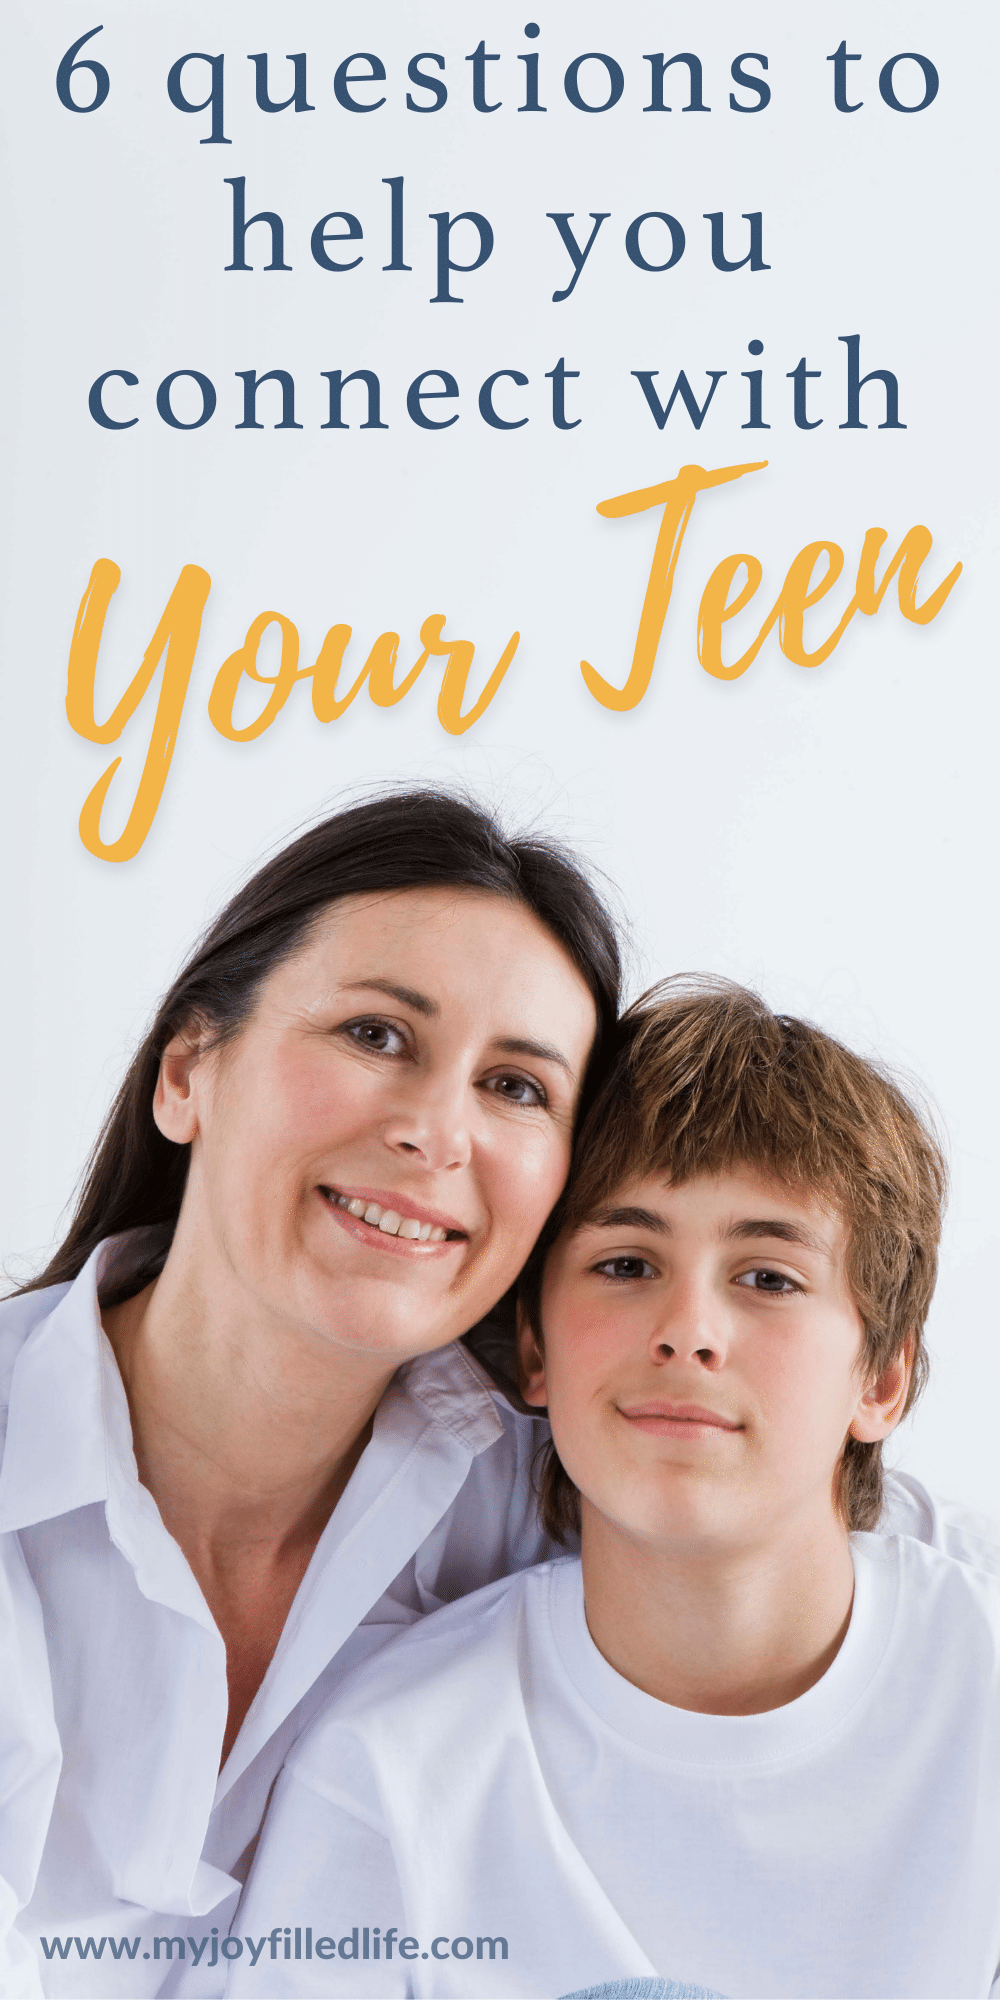 Questions to connect with teen